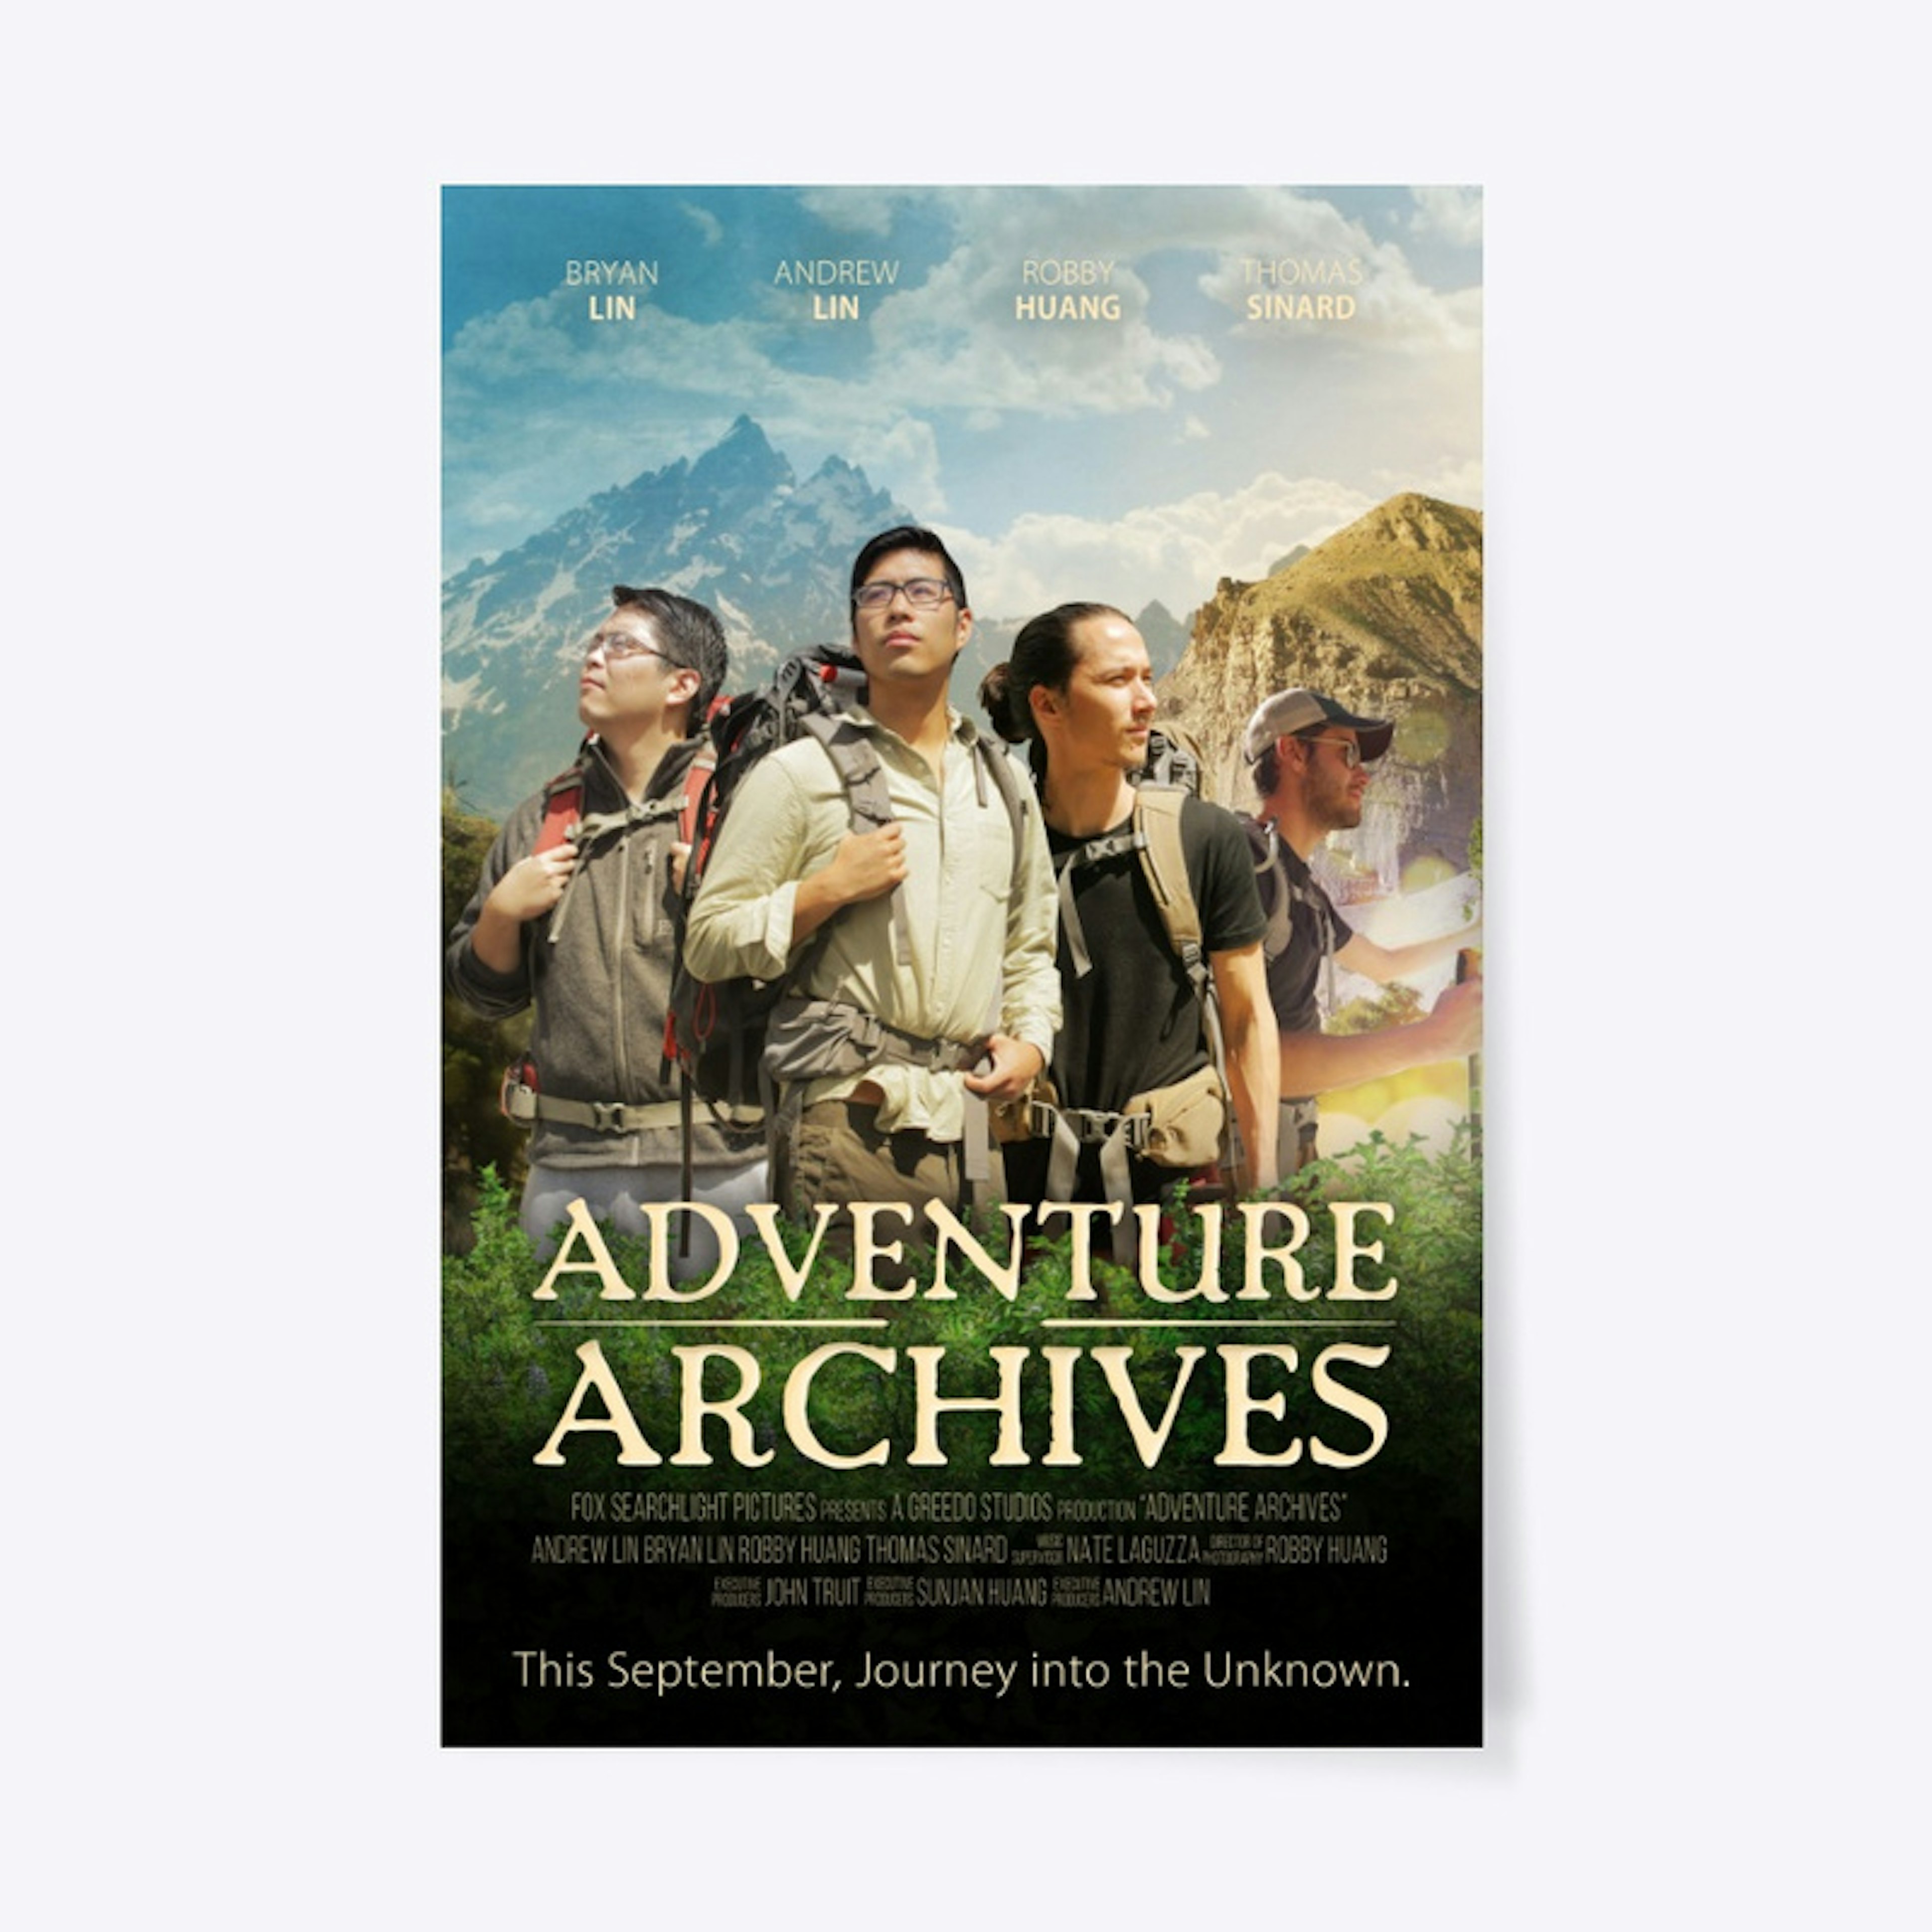 Adventure Archives Movie Poster!